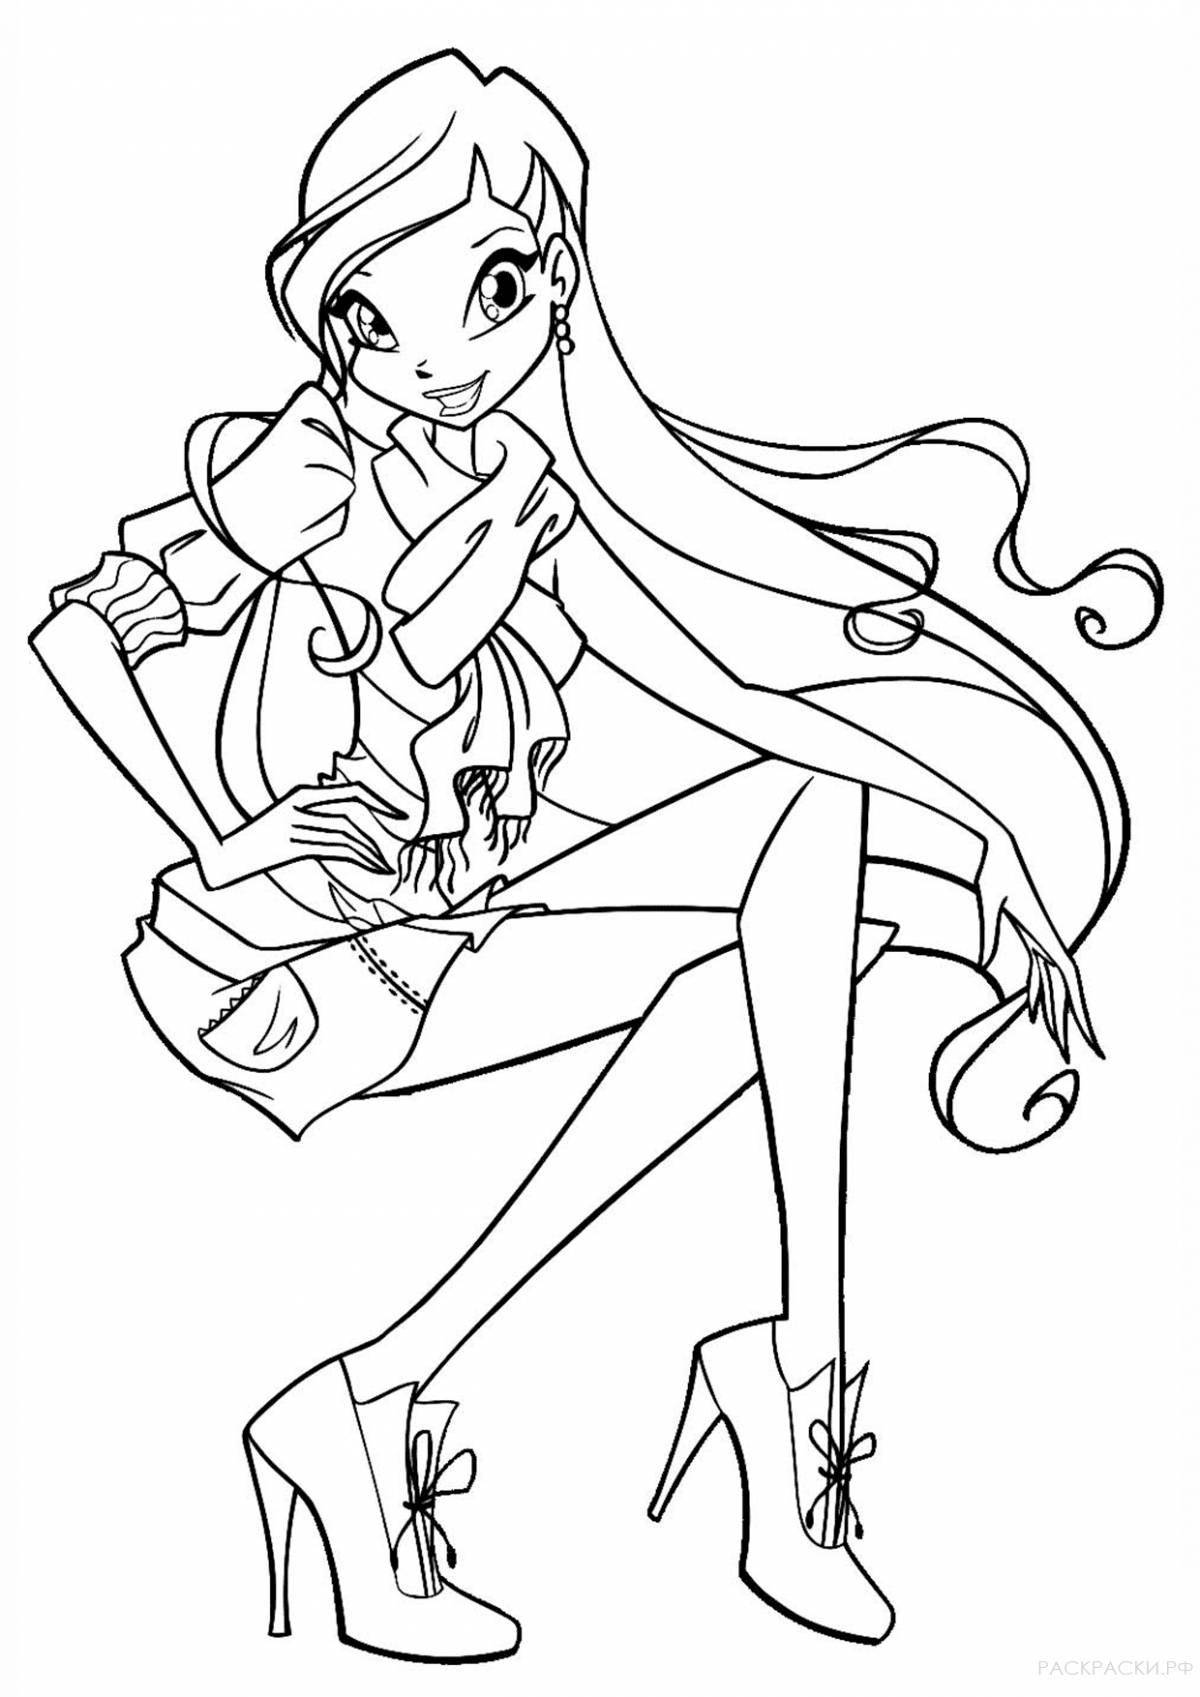 Coloring page charming stella